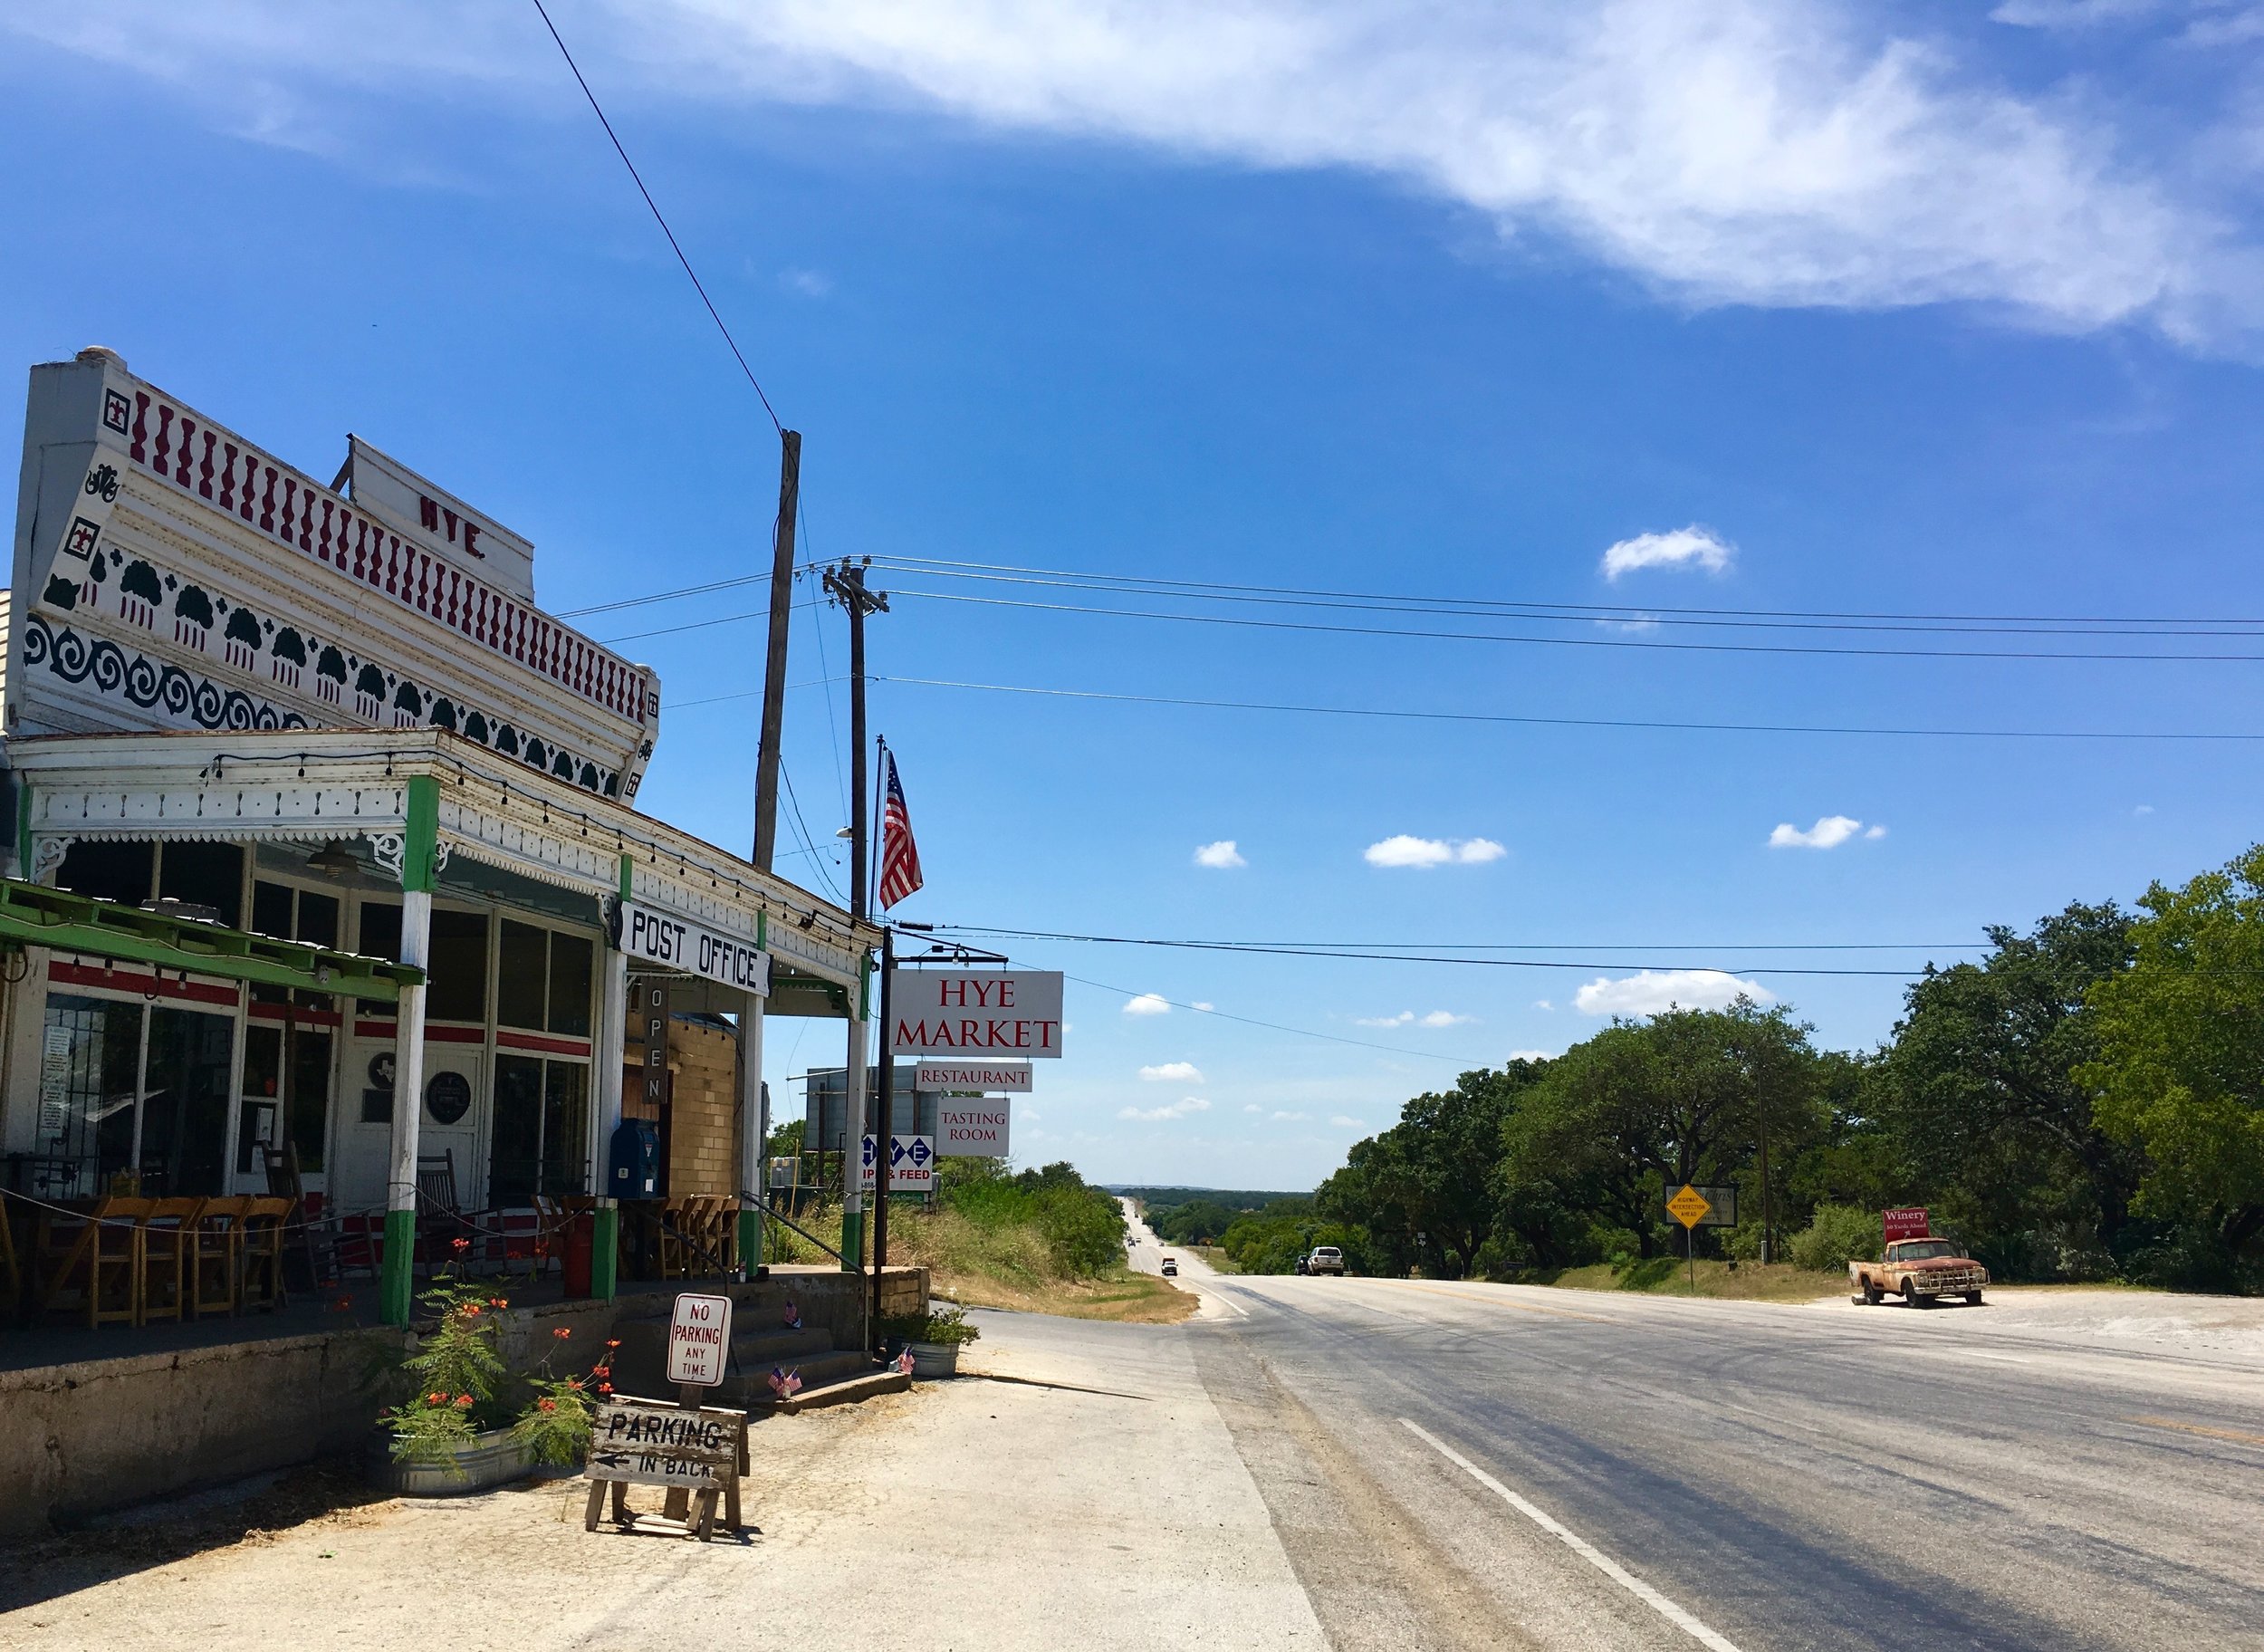 Hye Market in Texas Hill Country